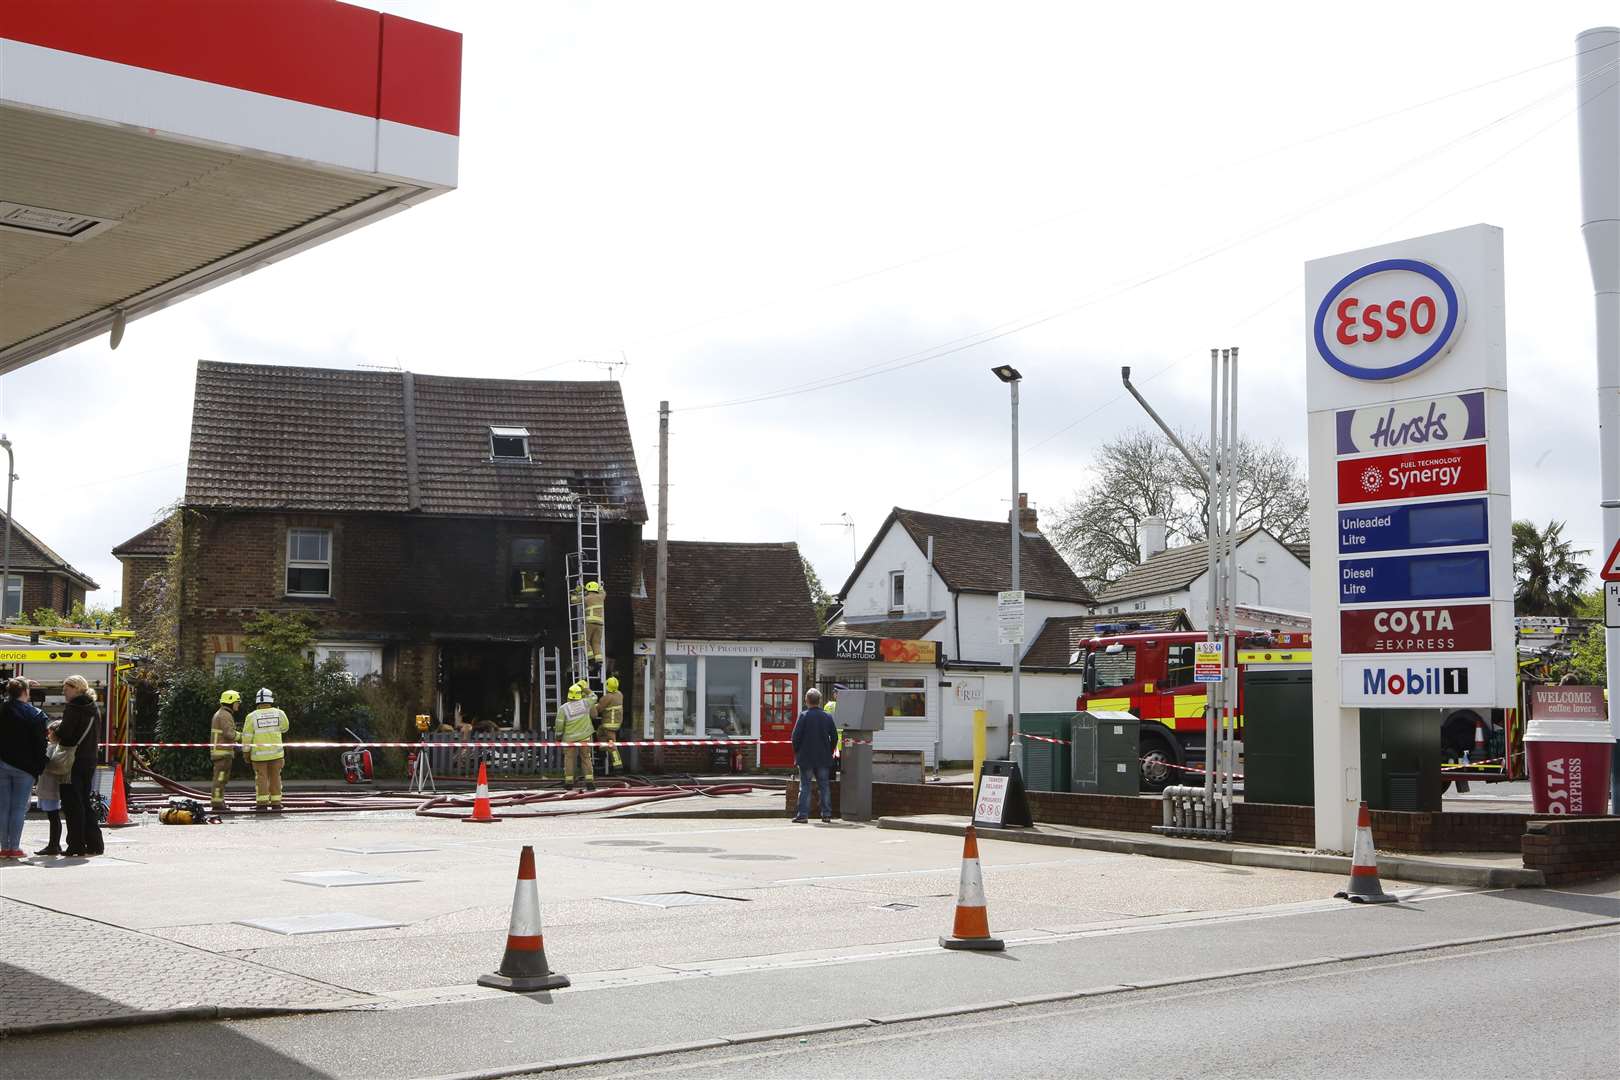 The fire erupted just metres from a petrol station